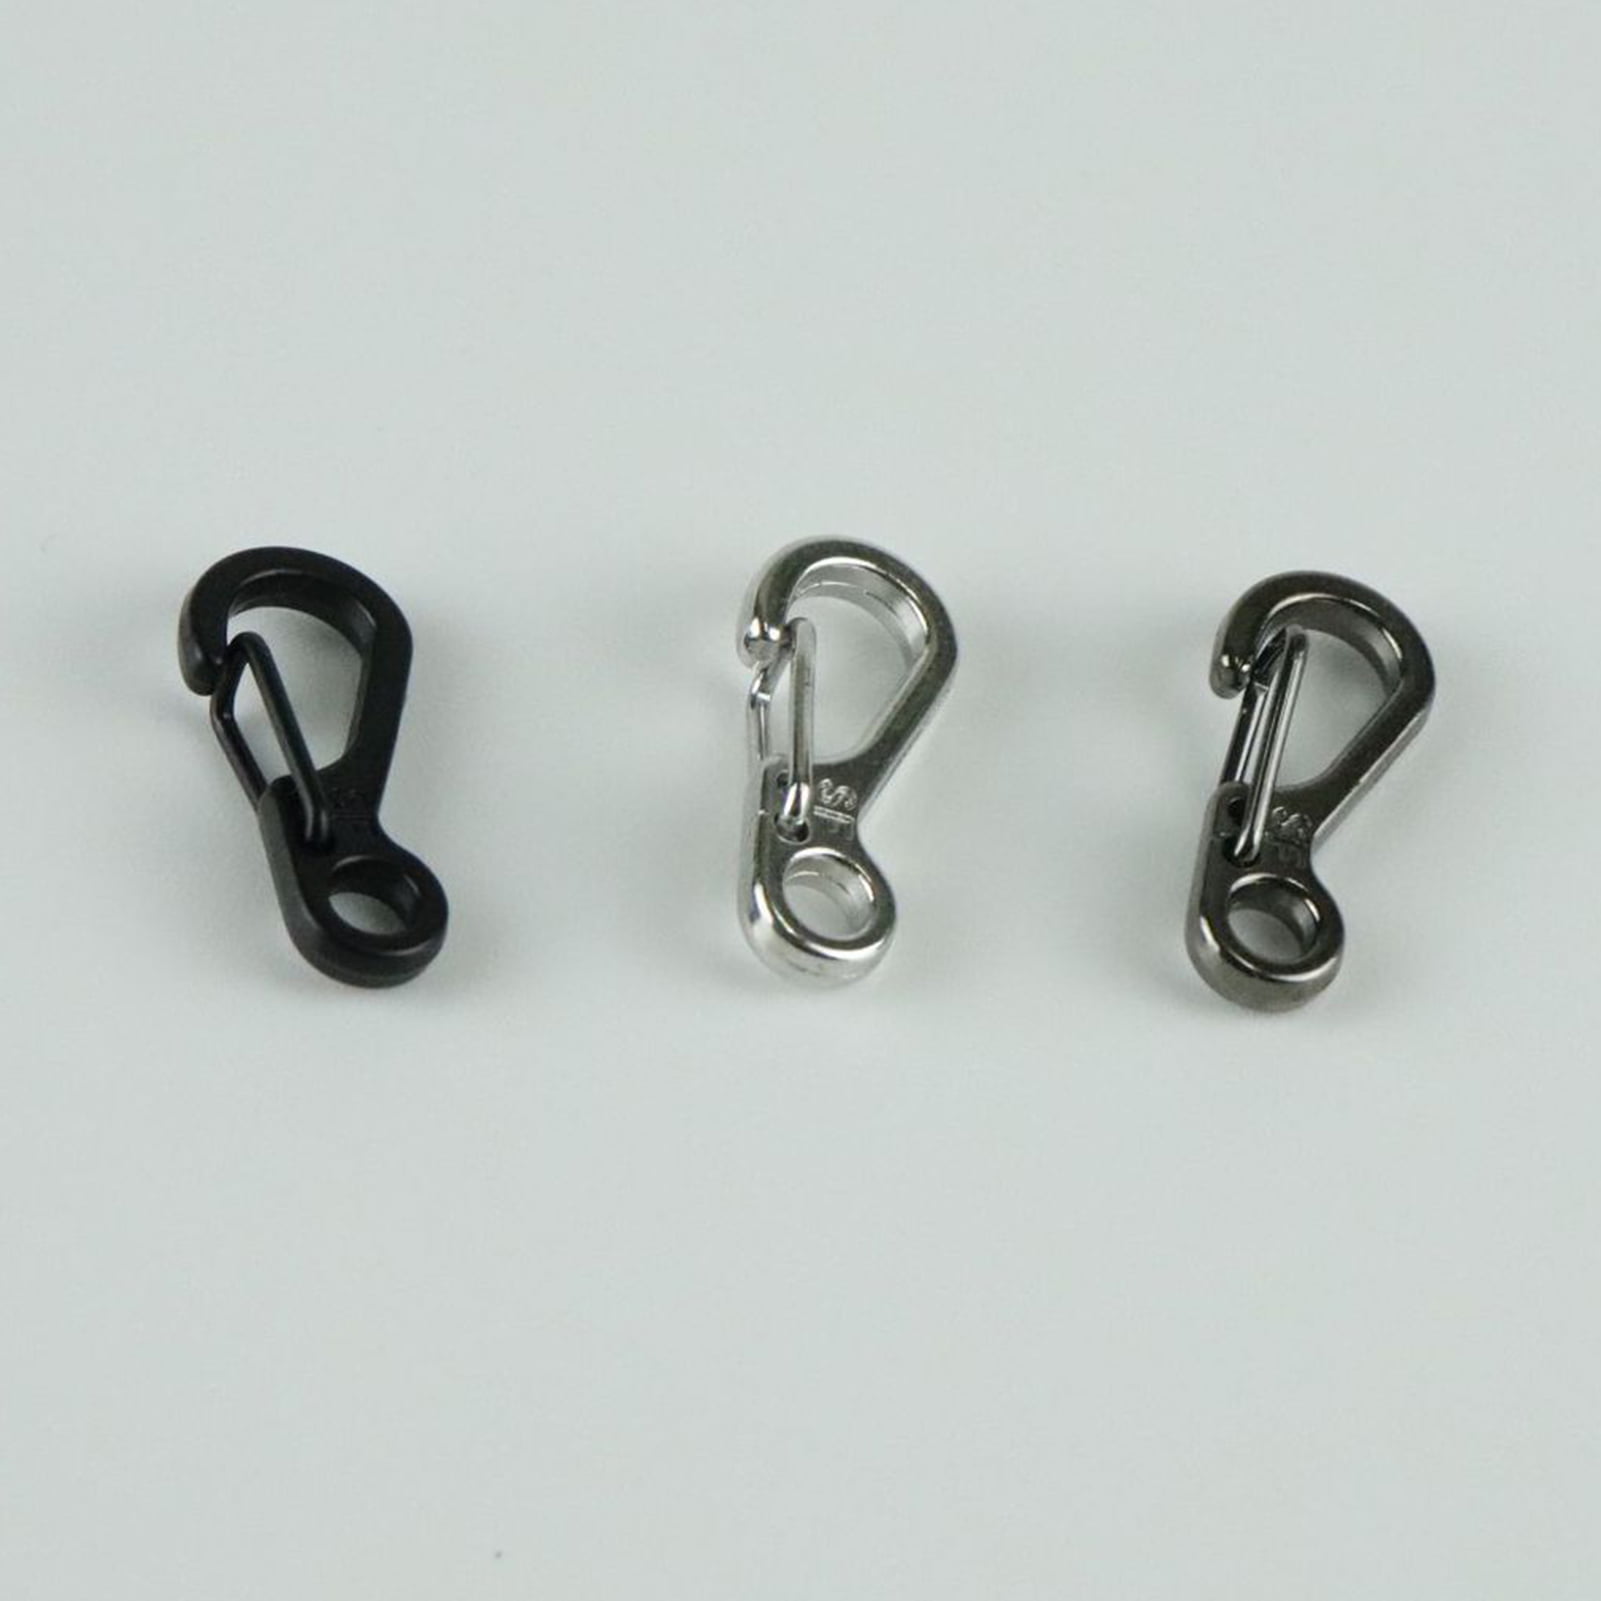 10pcs Mini Spring Backpack Clasps Hook Aluminum Alloy Keychain Buckle Carabiners 